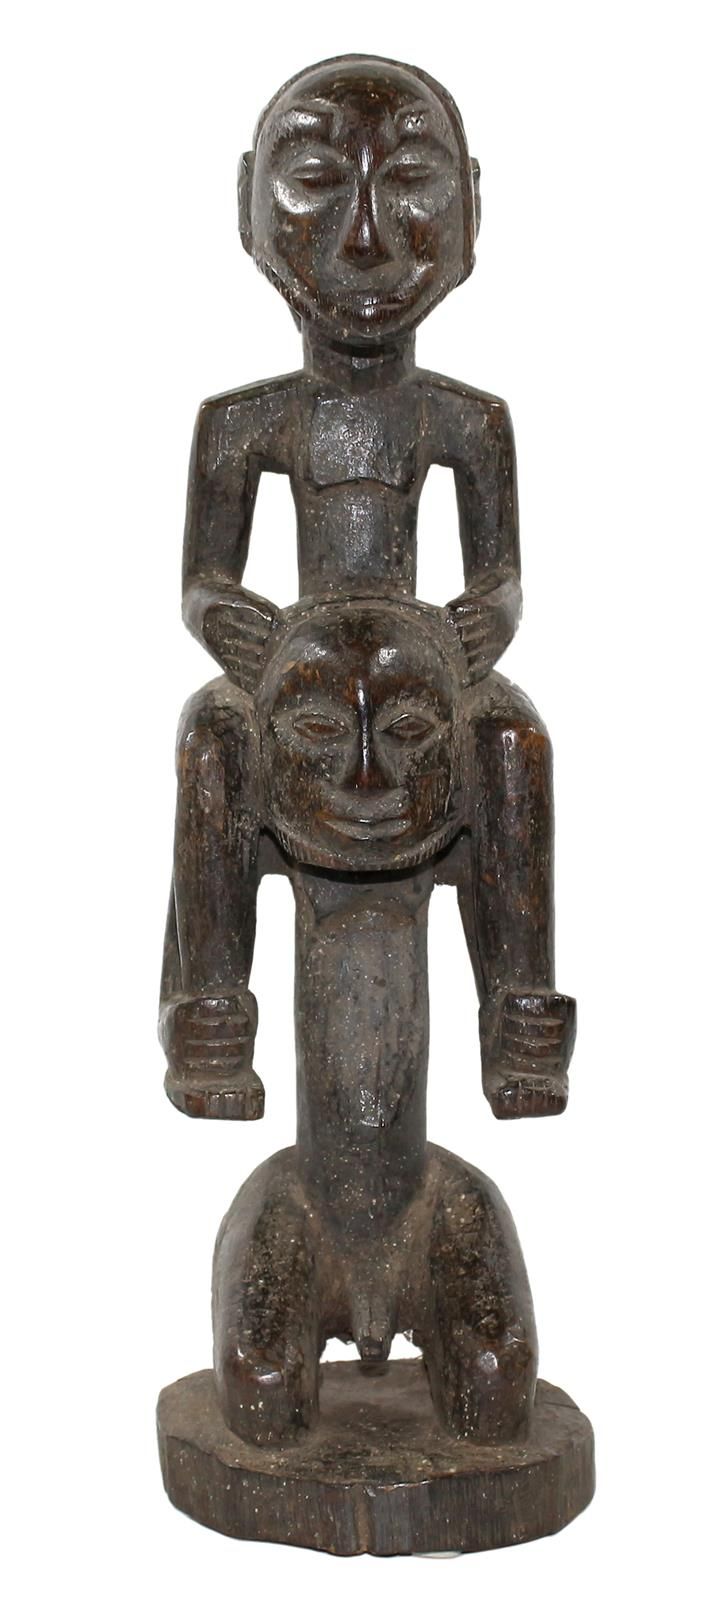 Luba Hembe D.R.Kongo Piggyback figure. Probably scout worn on the back of a male&hellip;